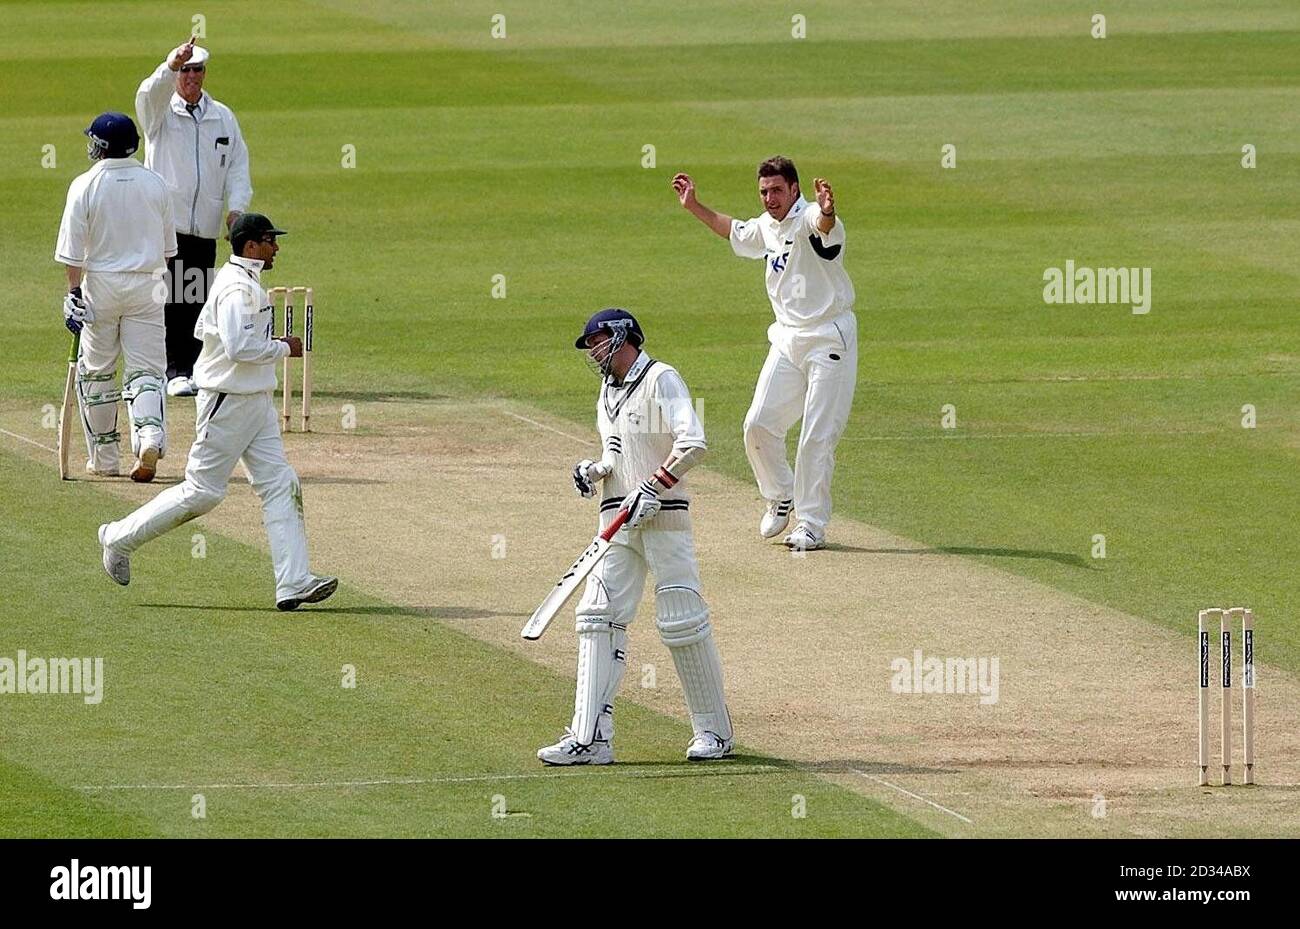 Umpire John Hampshire (top left) raises his finger as Nottinghamshire's Paul Franks (right) celebrates after trapping Middlesex's Alan Richardson (second right) lbw for 15 runs. Stock Photo